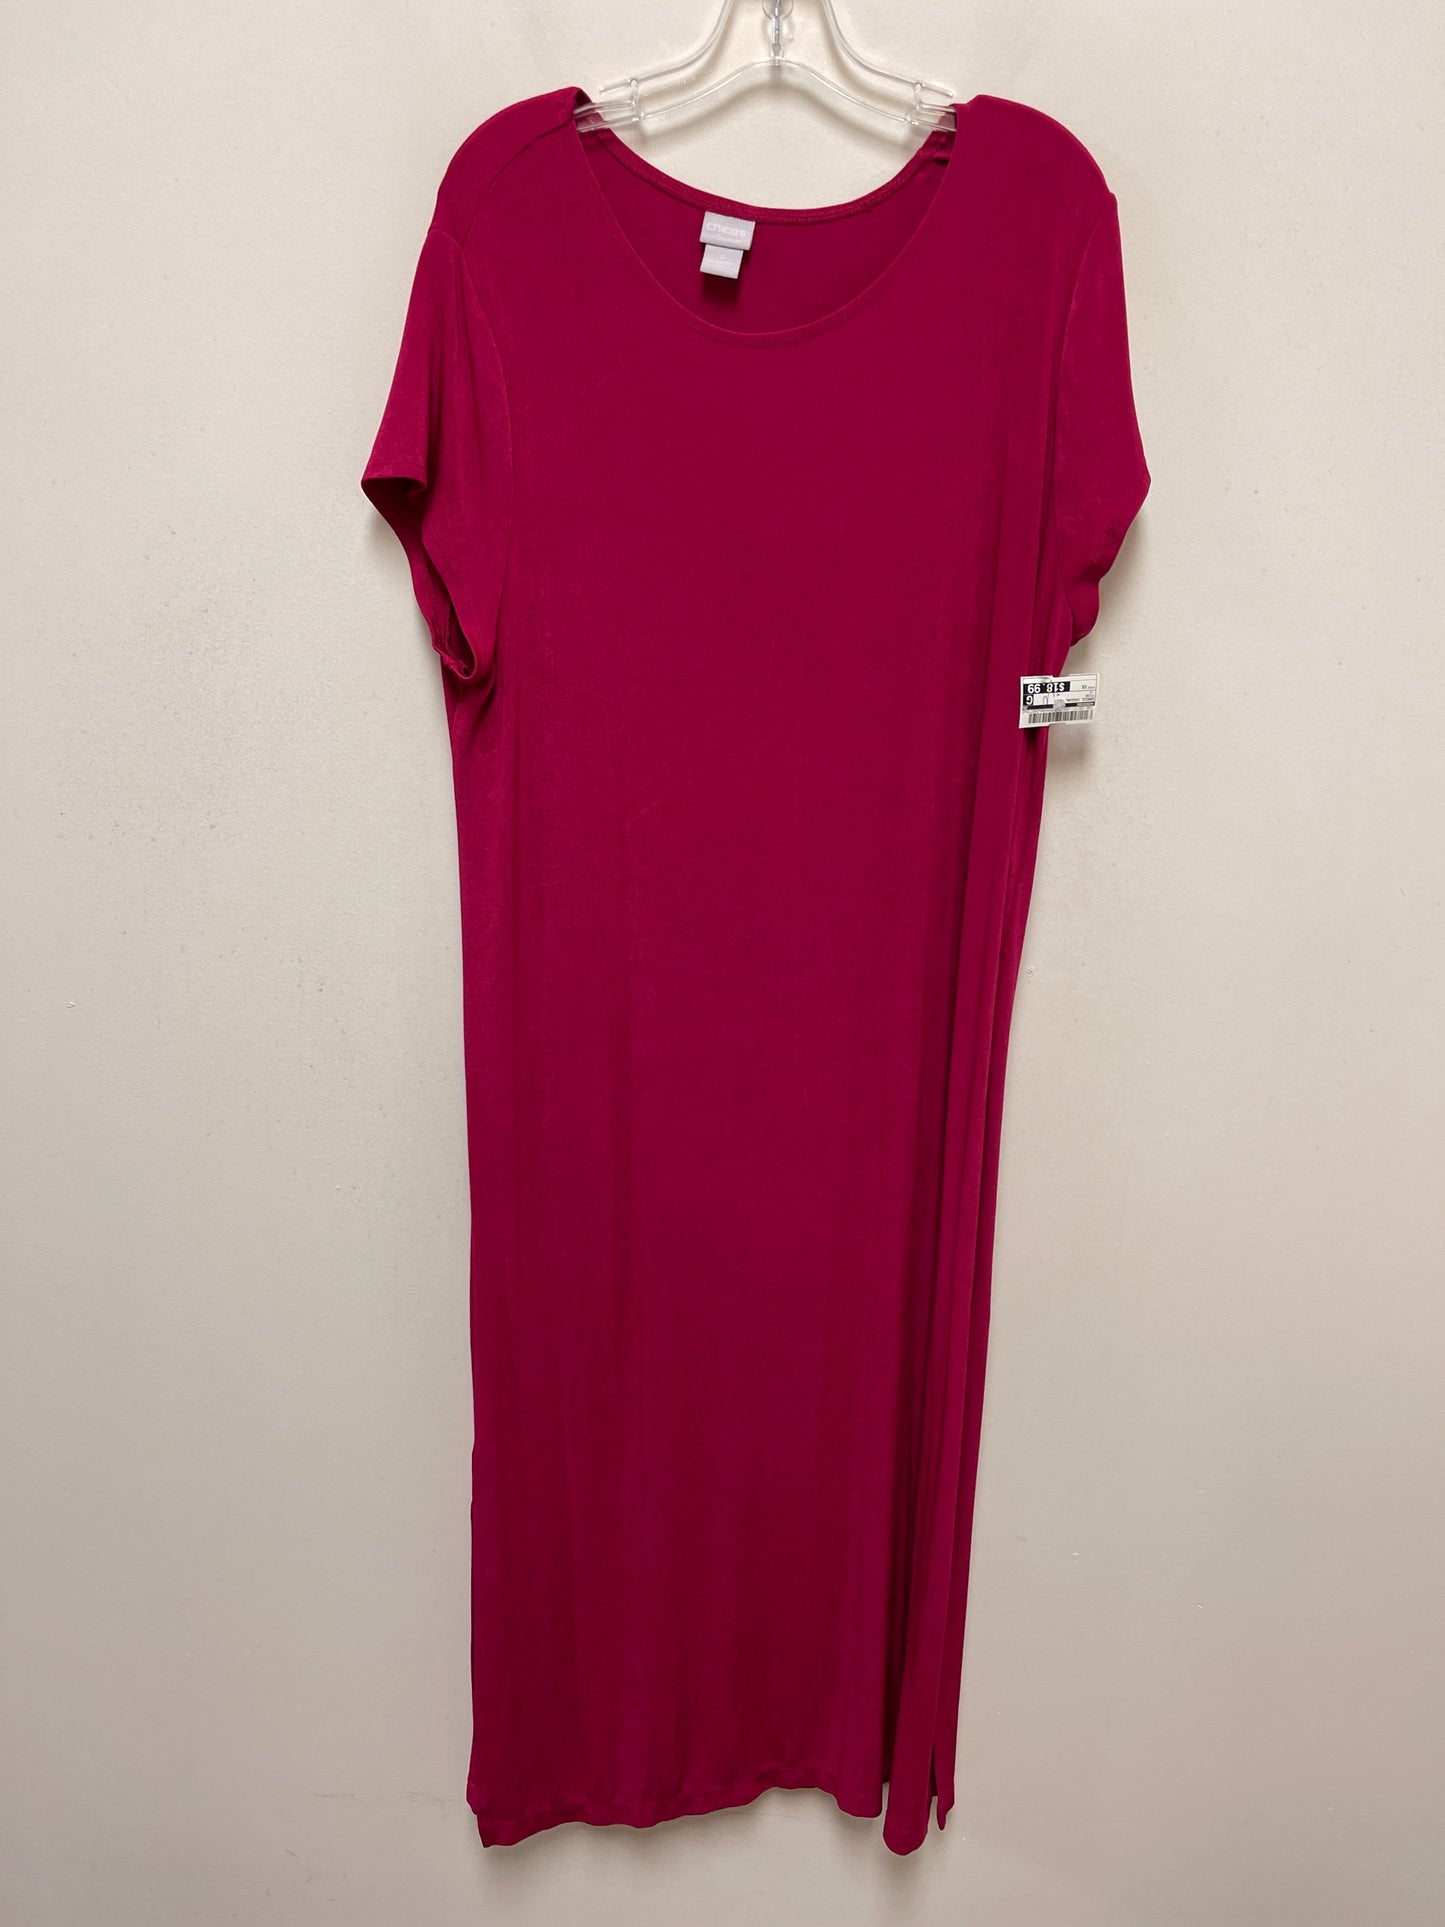 Pink Dress Casual Maxi Chicos, Size 1x